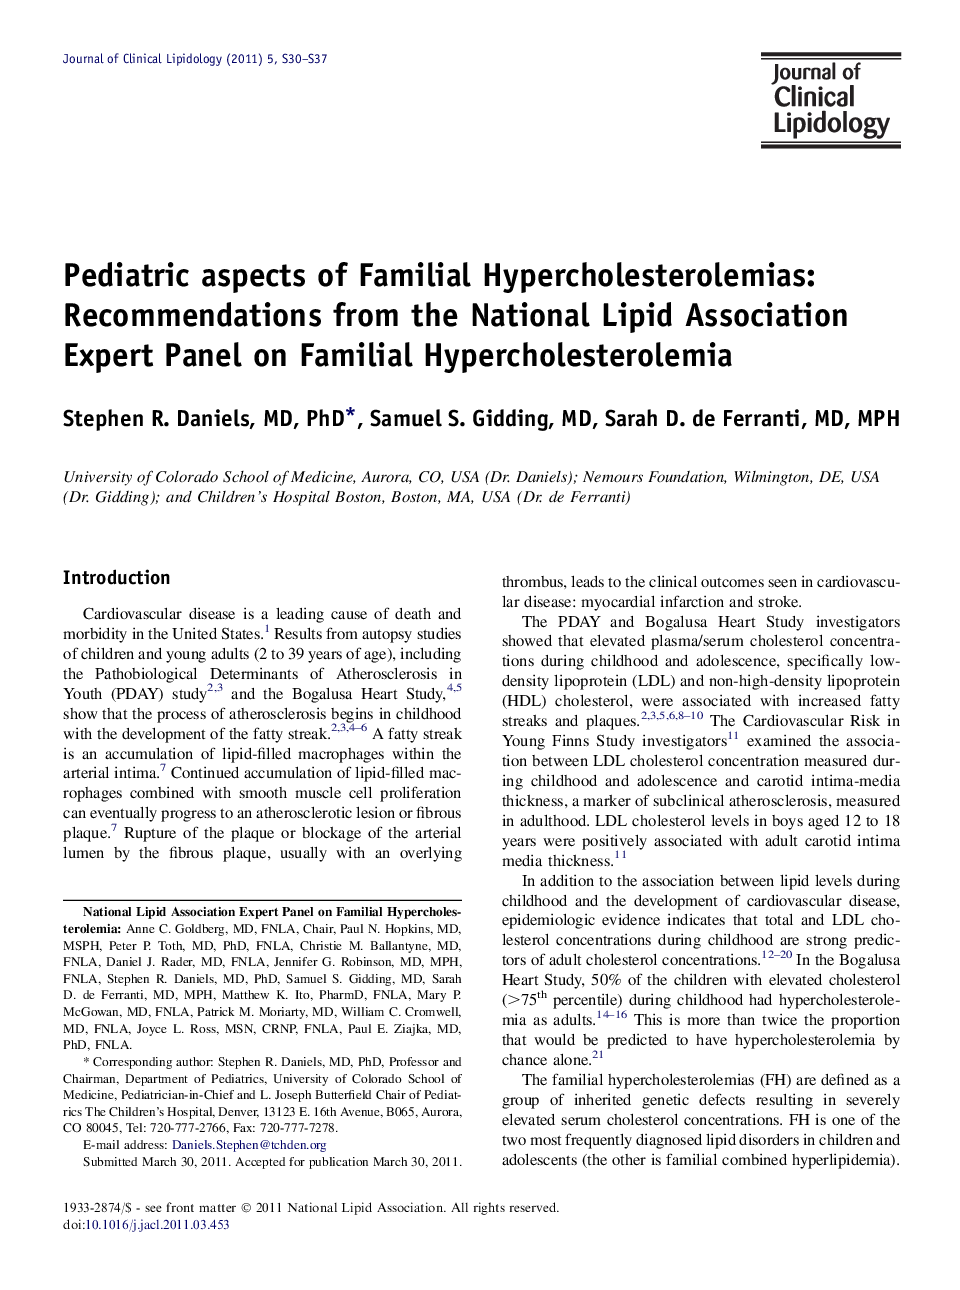 Pediatric aspects of Familial Hypercholesterolemias: Recommendations from the National Lipid Association Expert Panel on Familial Hypercholesterolemia